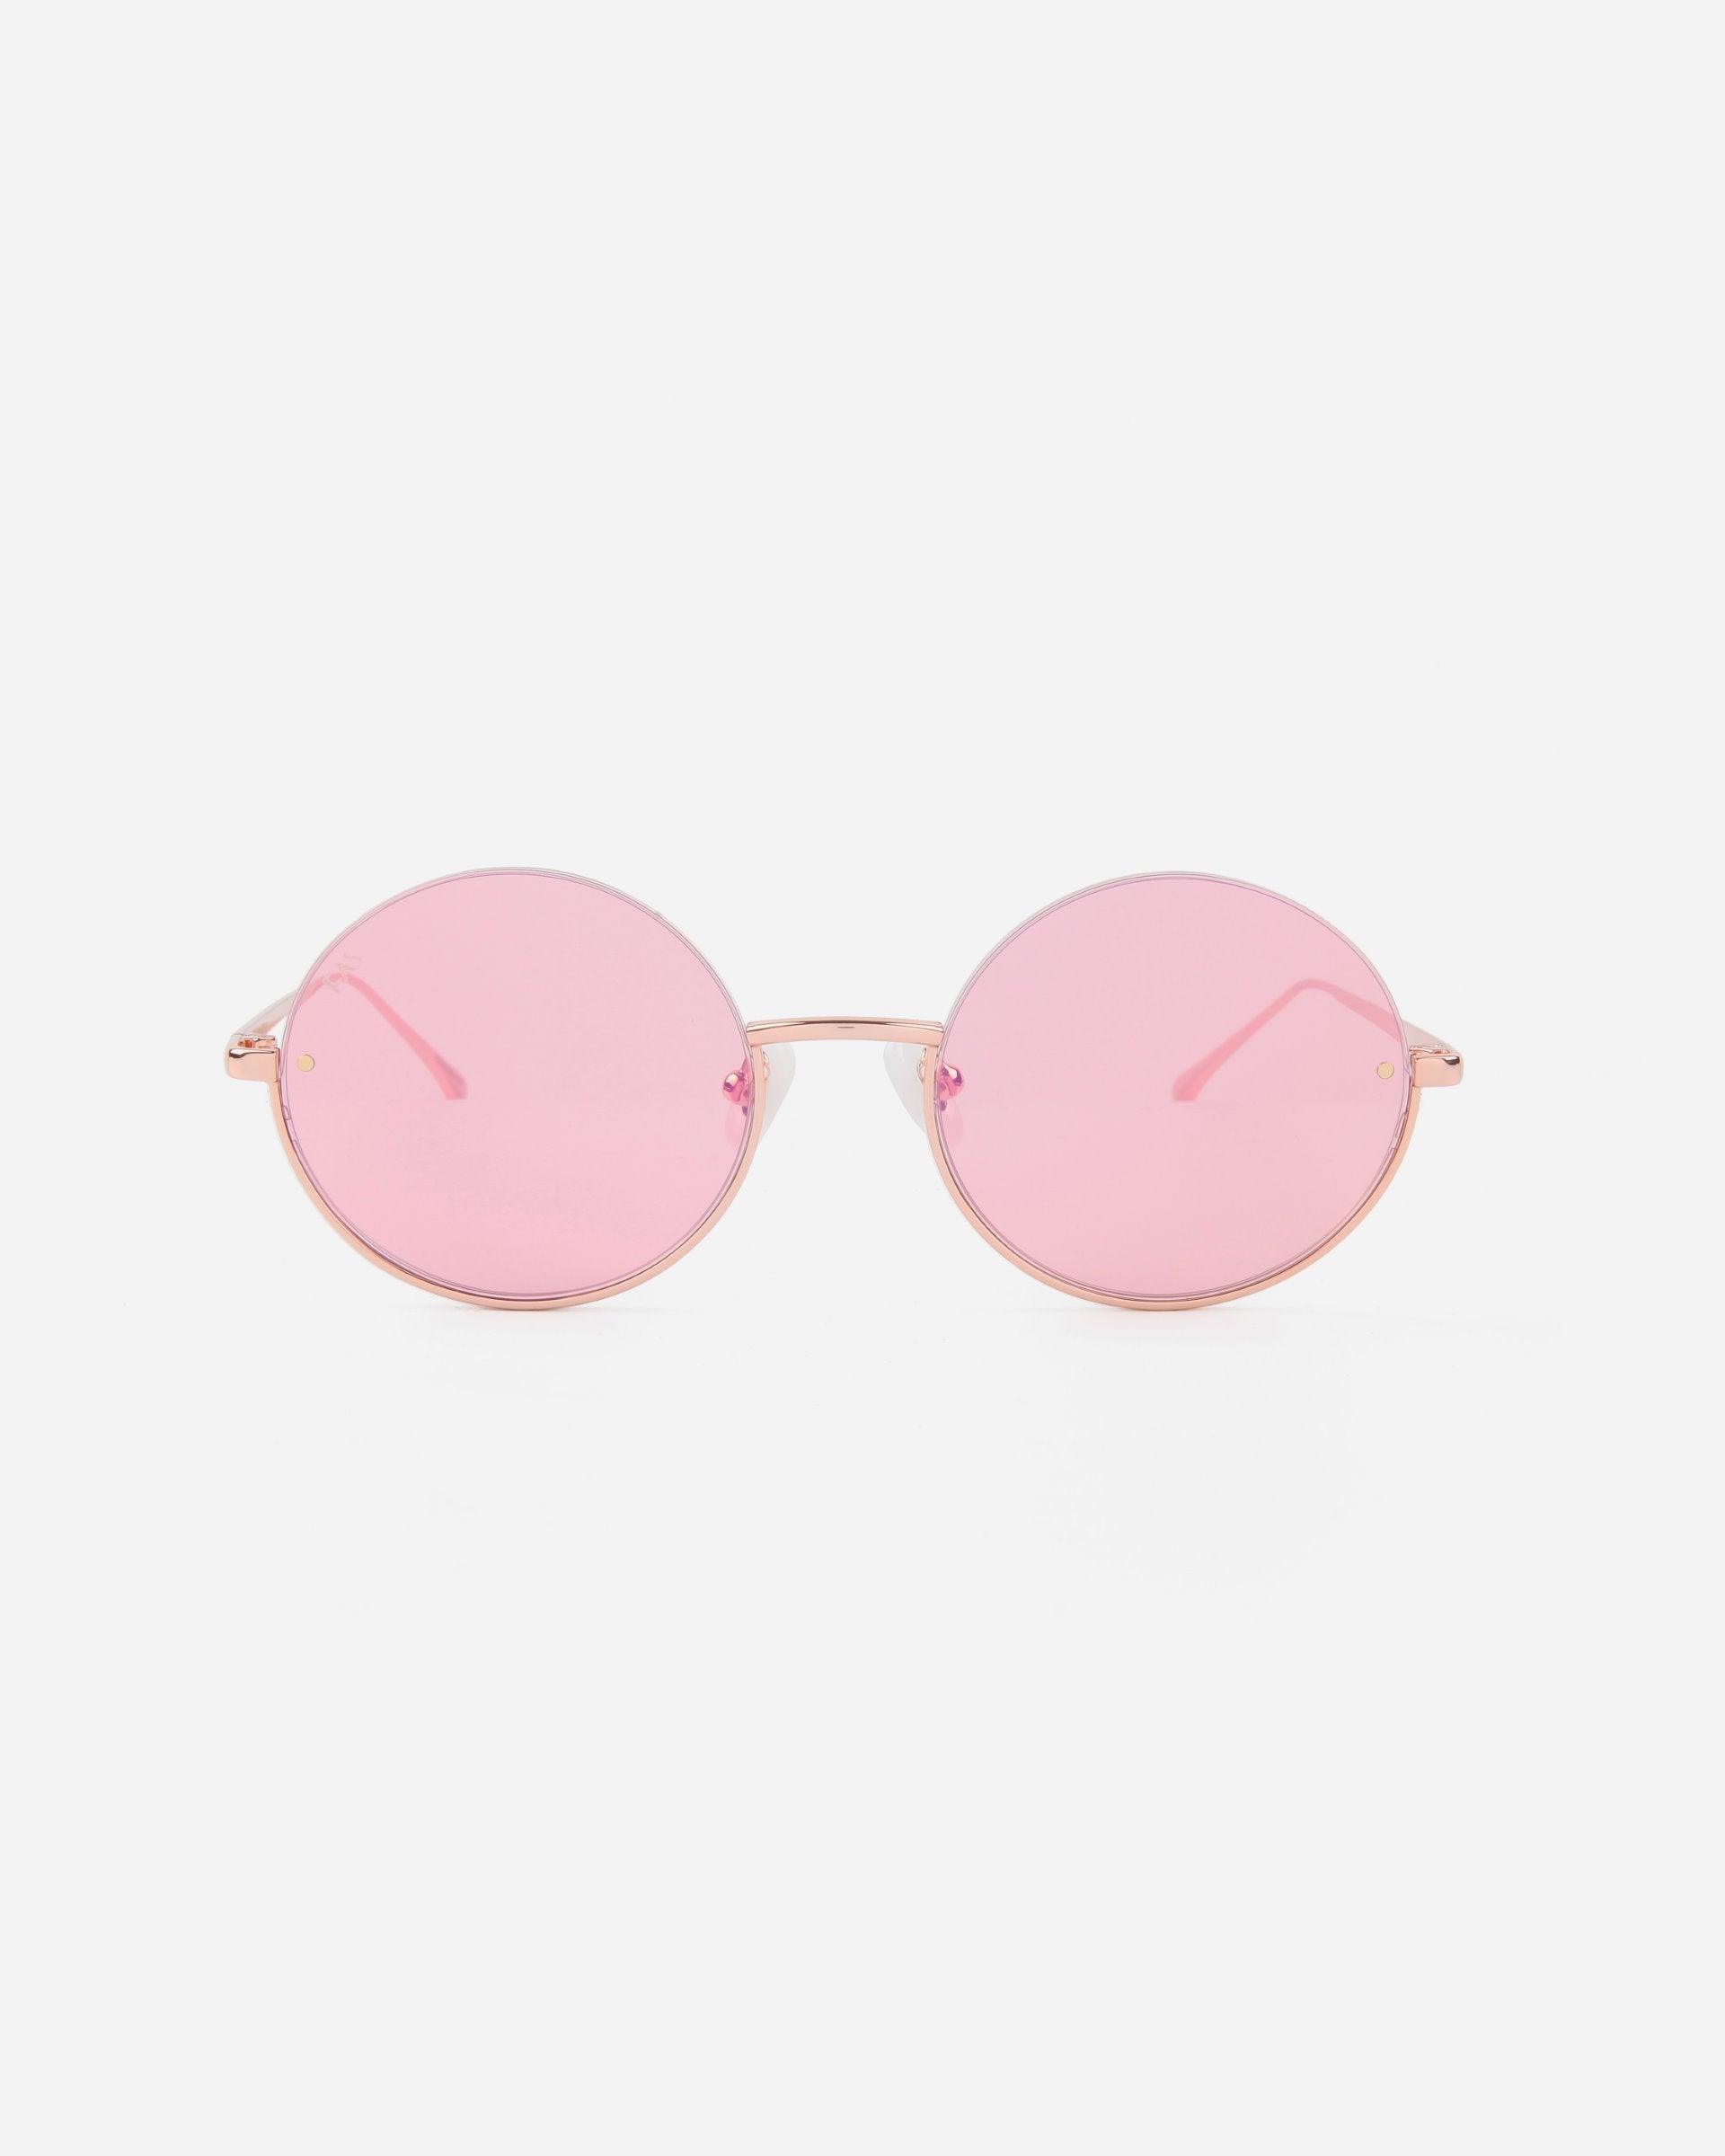 A pair of Skyline sunglasses by For Art's Sake® with pink-tinted, UVA & UVB-protected Nylon lenses and thin gold stainless steel frames. The design is minimalist, with straight temples and no visible branding. The background is plain white, emphasizing the eyewear's trendy and stylish appearance.